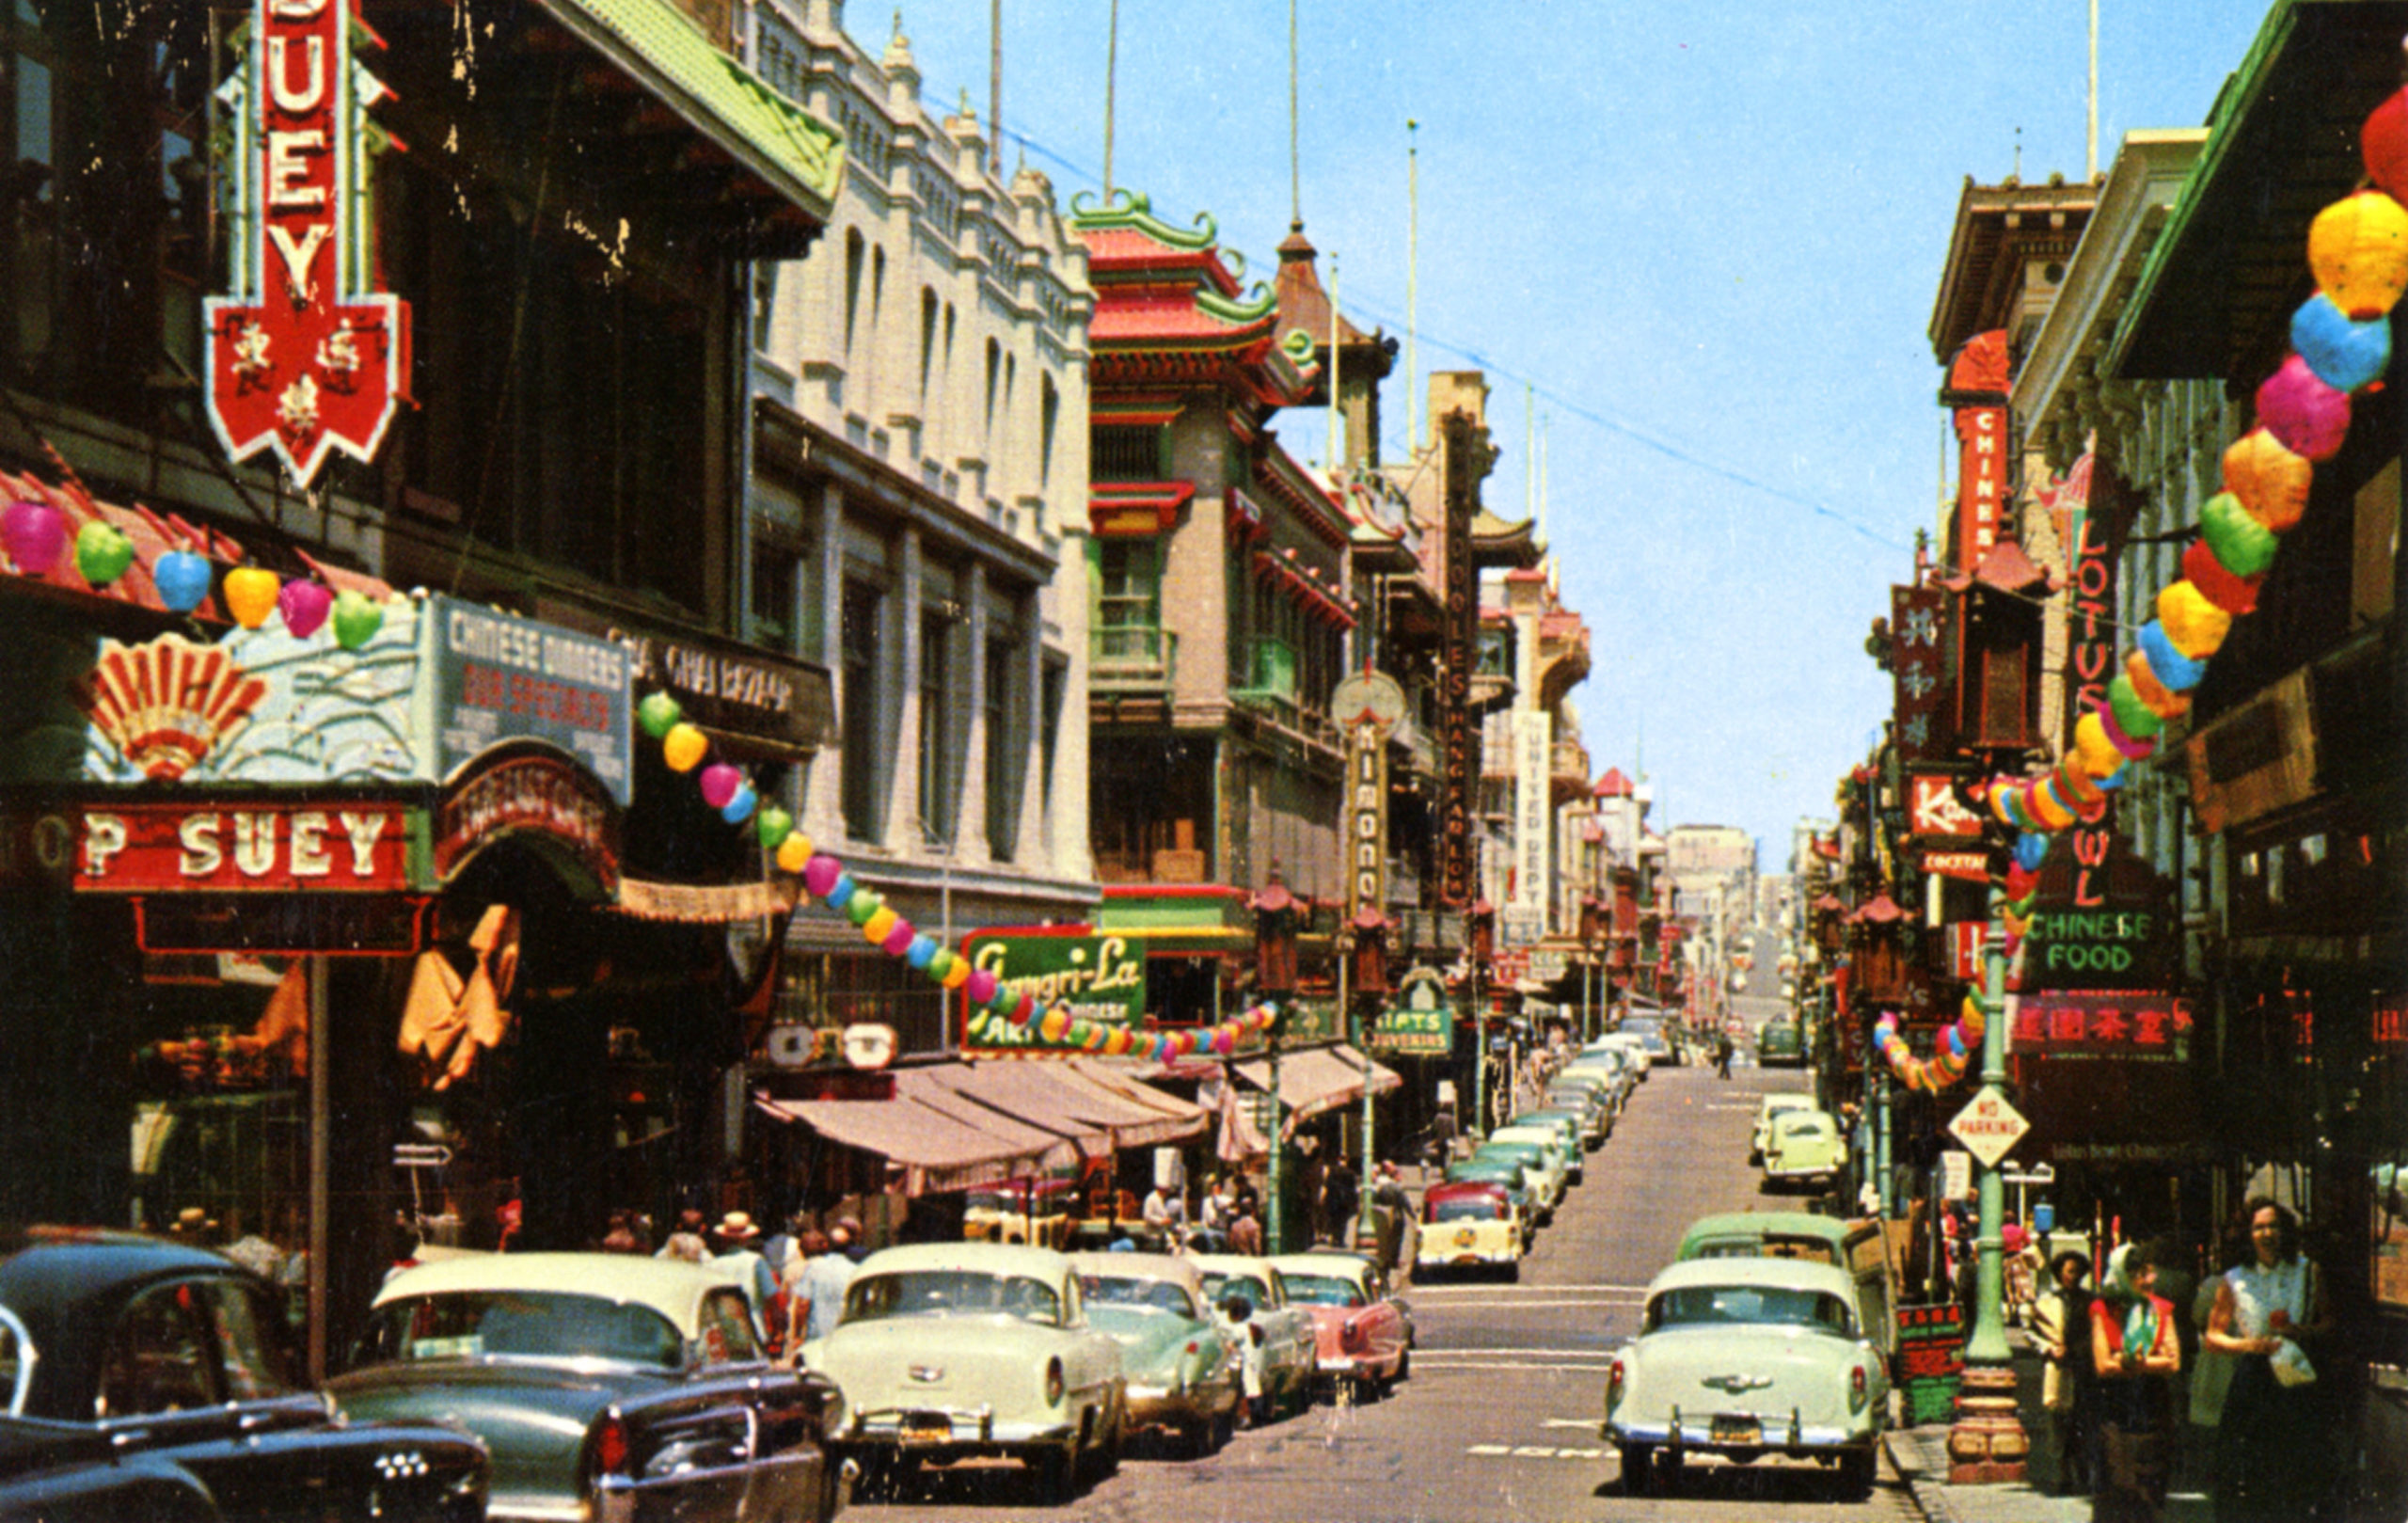 cars line the streets of Chinatown in San Francisco in 1957